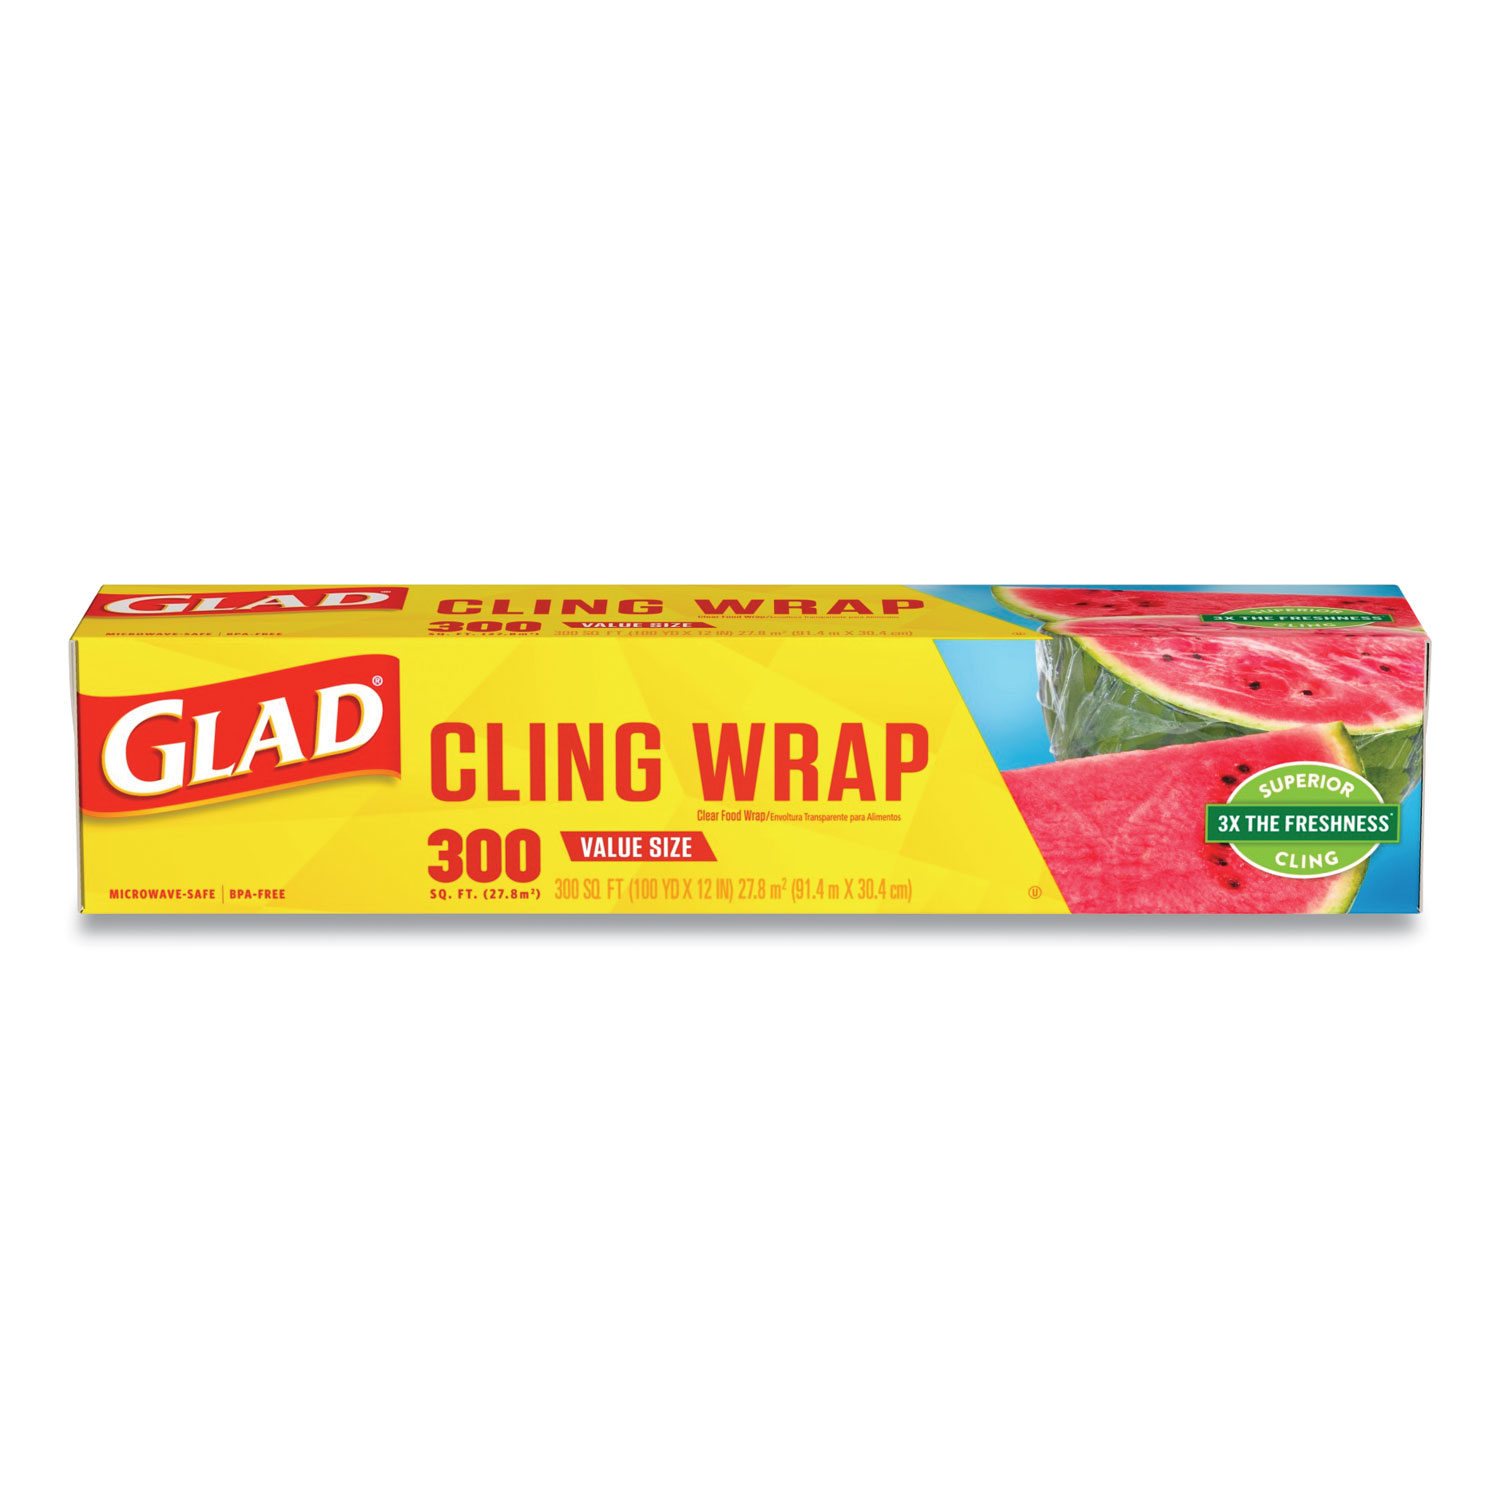 cling food wrap